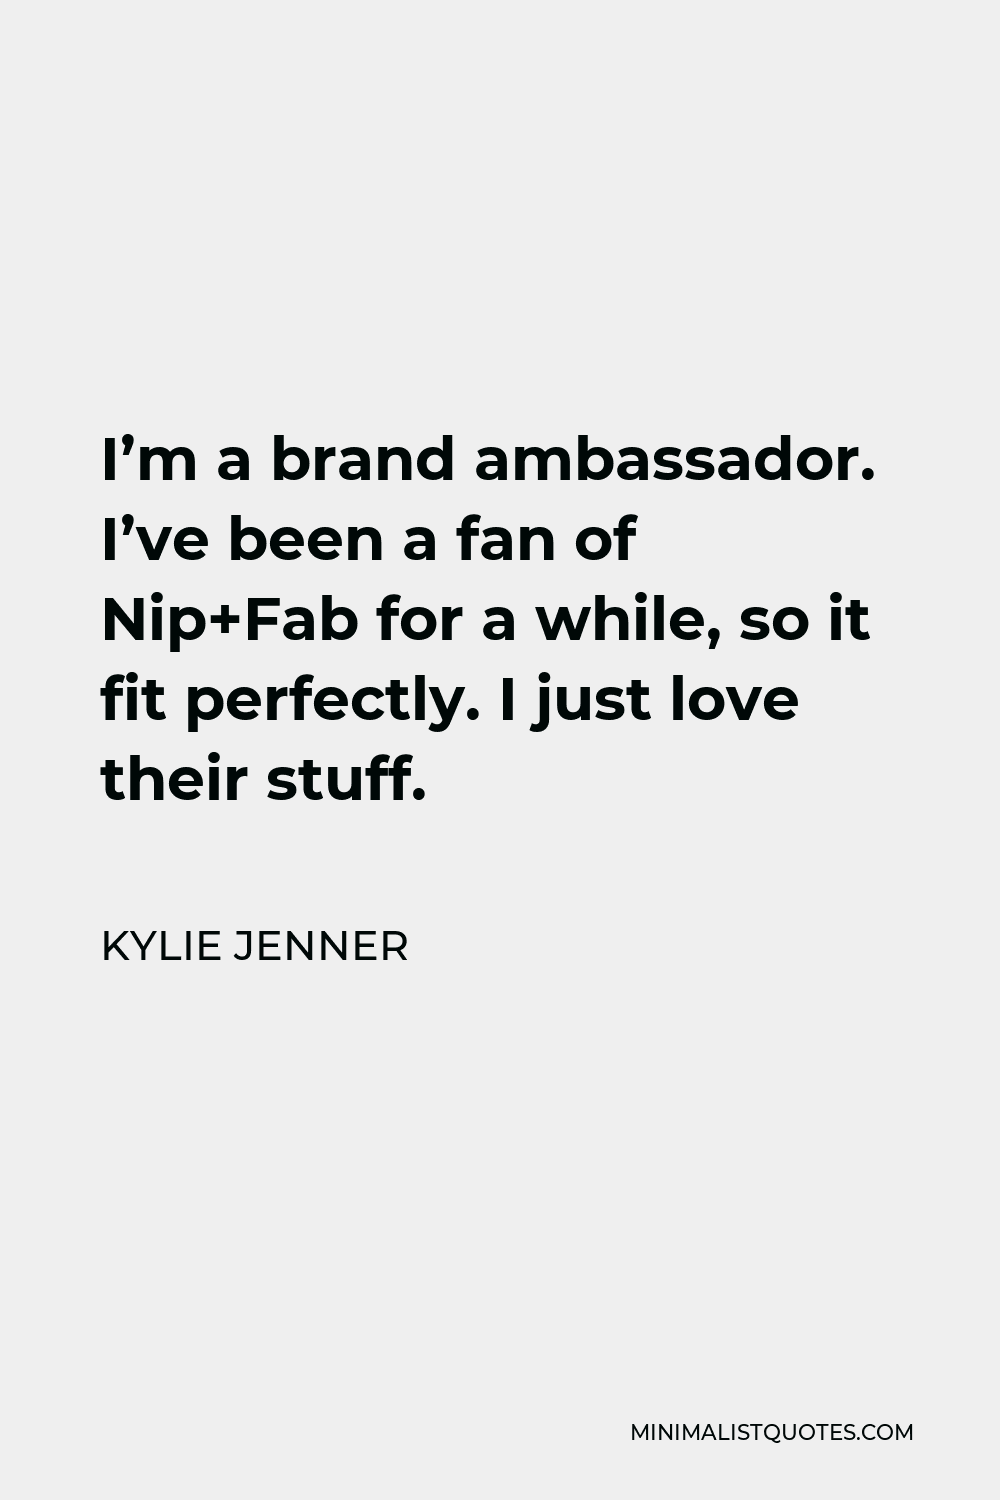 Kylie Jenner Quote - I’m a brand ambassador. I’ve been a fan of Nip+Fab for a while, so it fit perfectly. I just love their stuff.